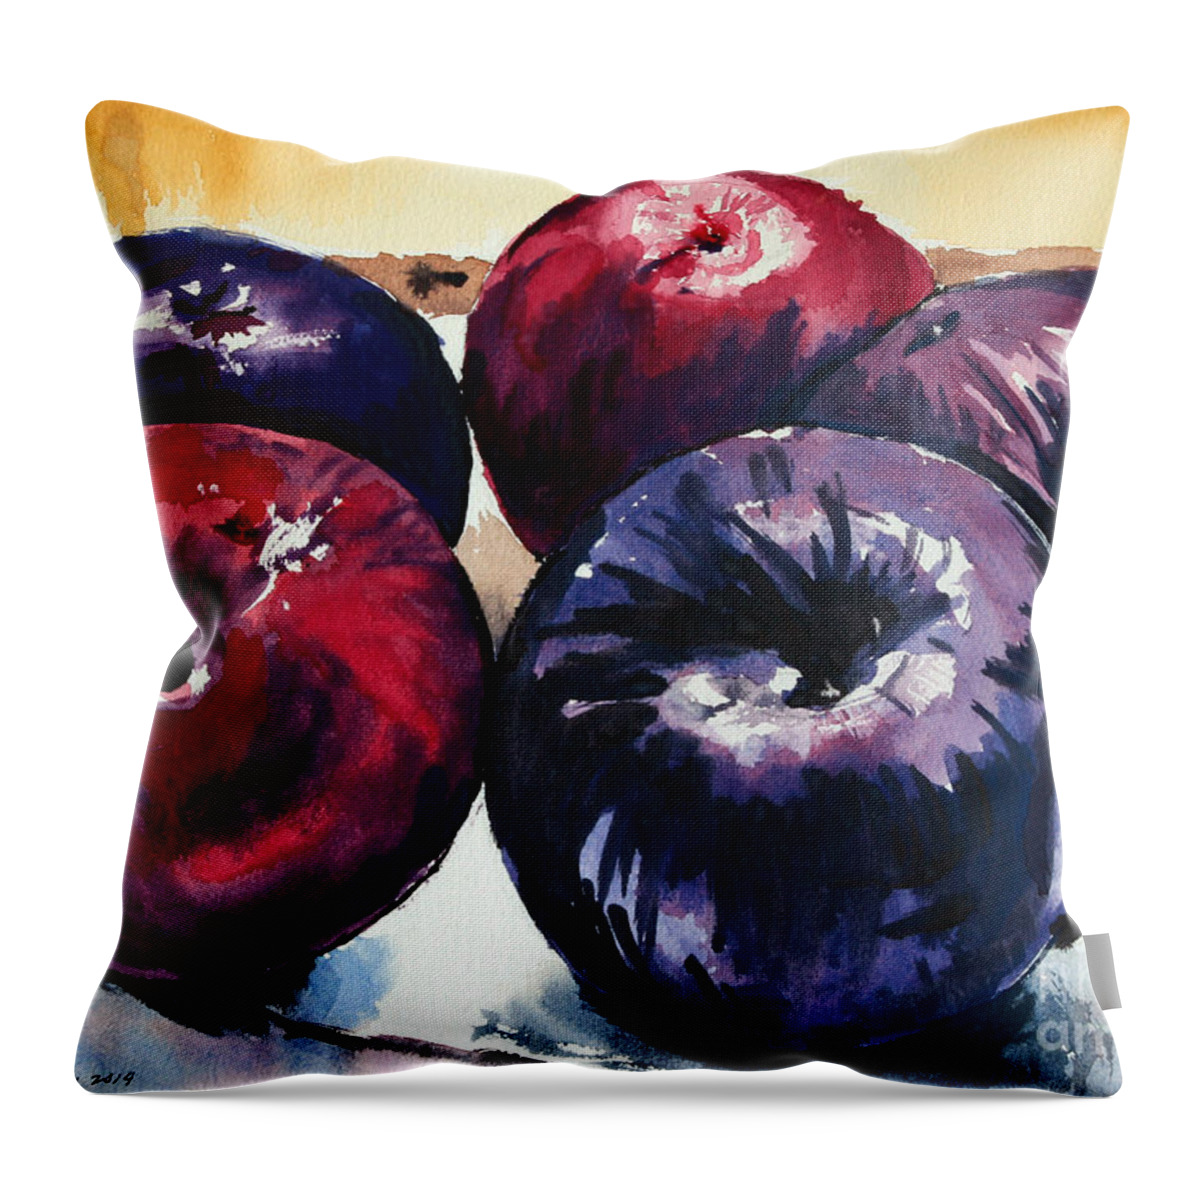 Plum Throw Pillow featuring the painting Plums by Joey Agbayani